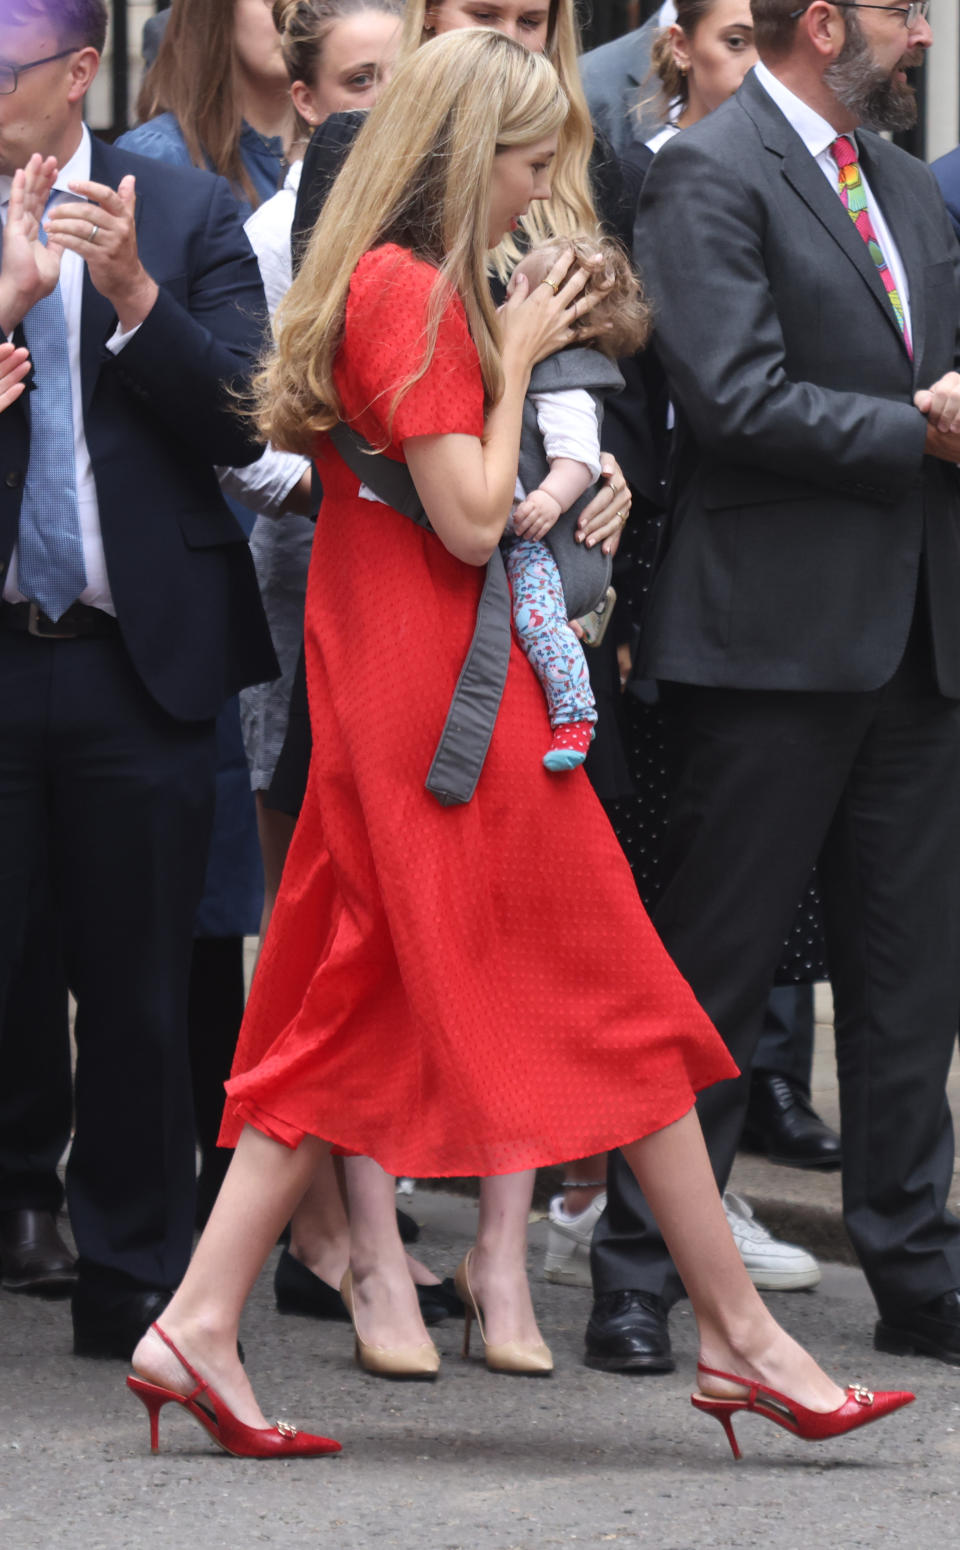 Carrie Johnson, the wife of Prime Minister Boris Johnson, walks back into 10 Downing Street, London, with their daughter Romy after he formally resign as Conservative Party leader. Picture date: Thursday July 7, 2022. (Photo by James Manning/PA Images via Getty Images)